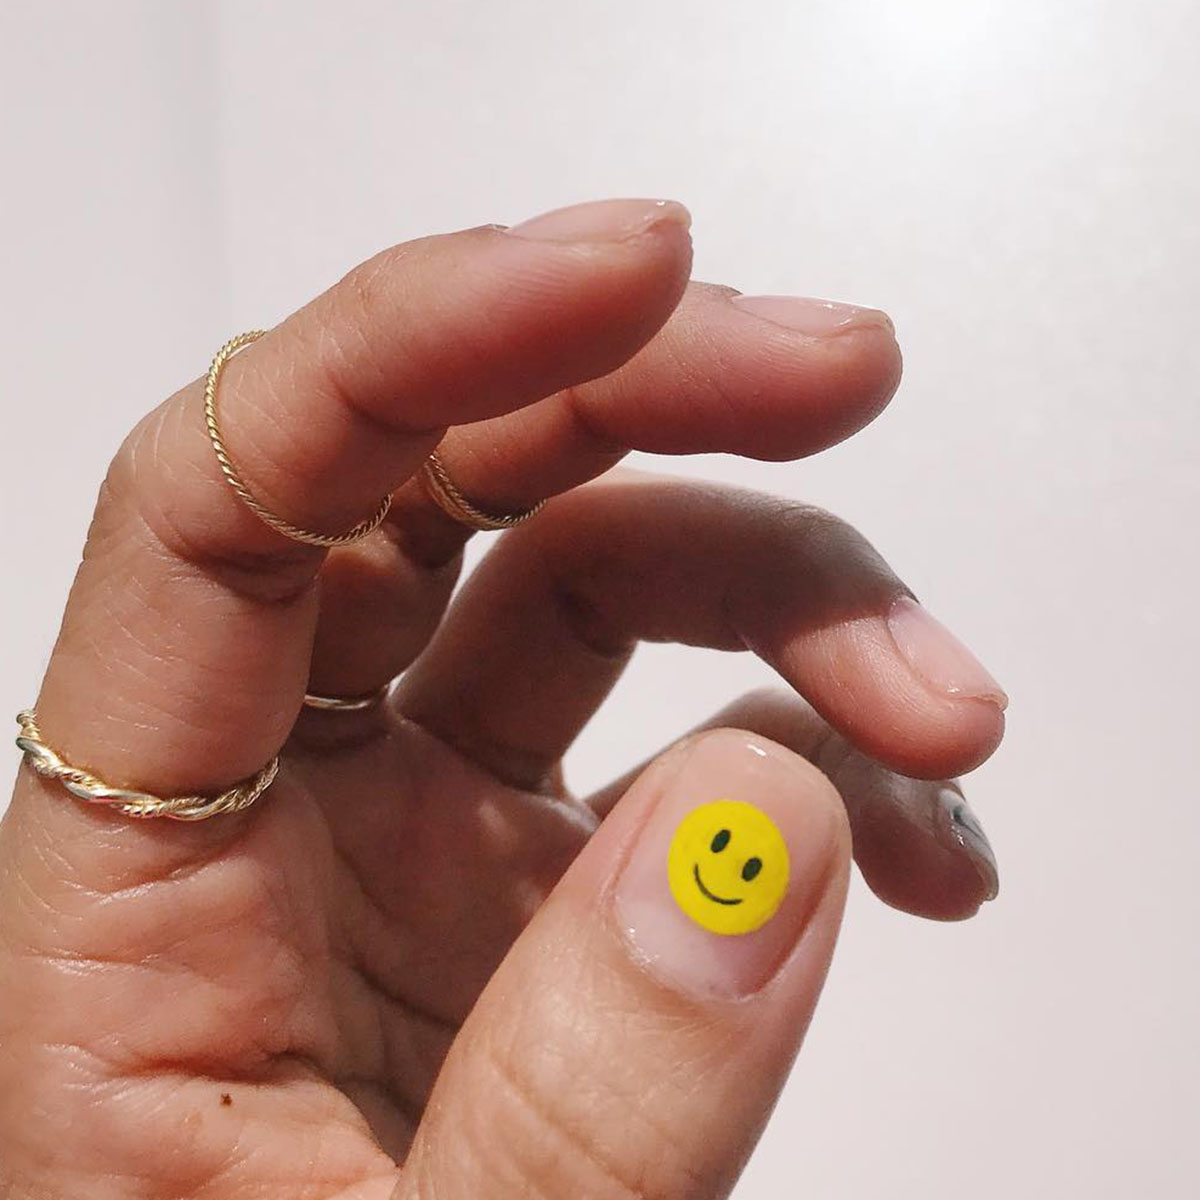 My Acrylic-Damaged Nails Looked Terrible Until I Tried These 15 Solutions